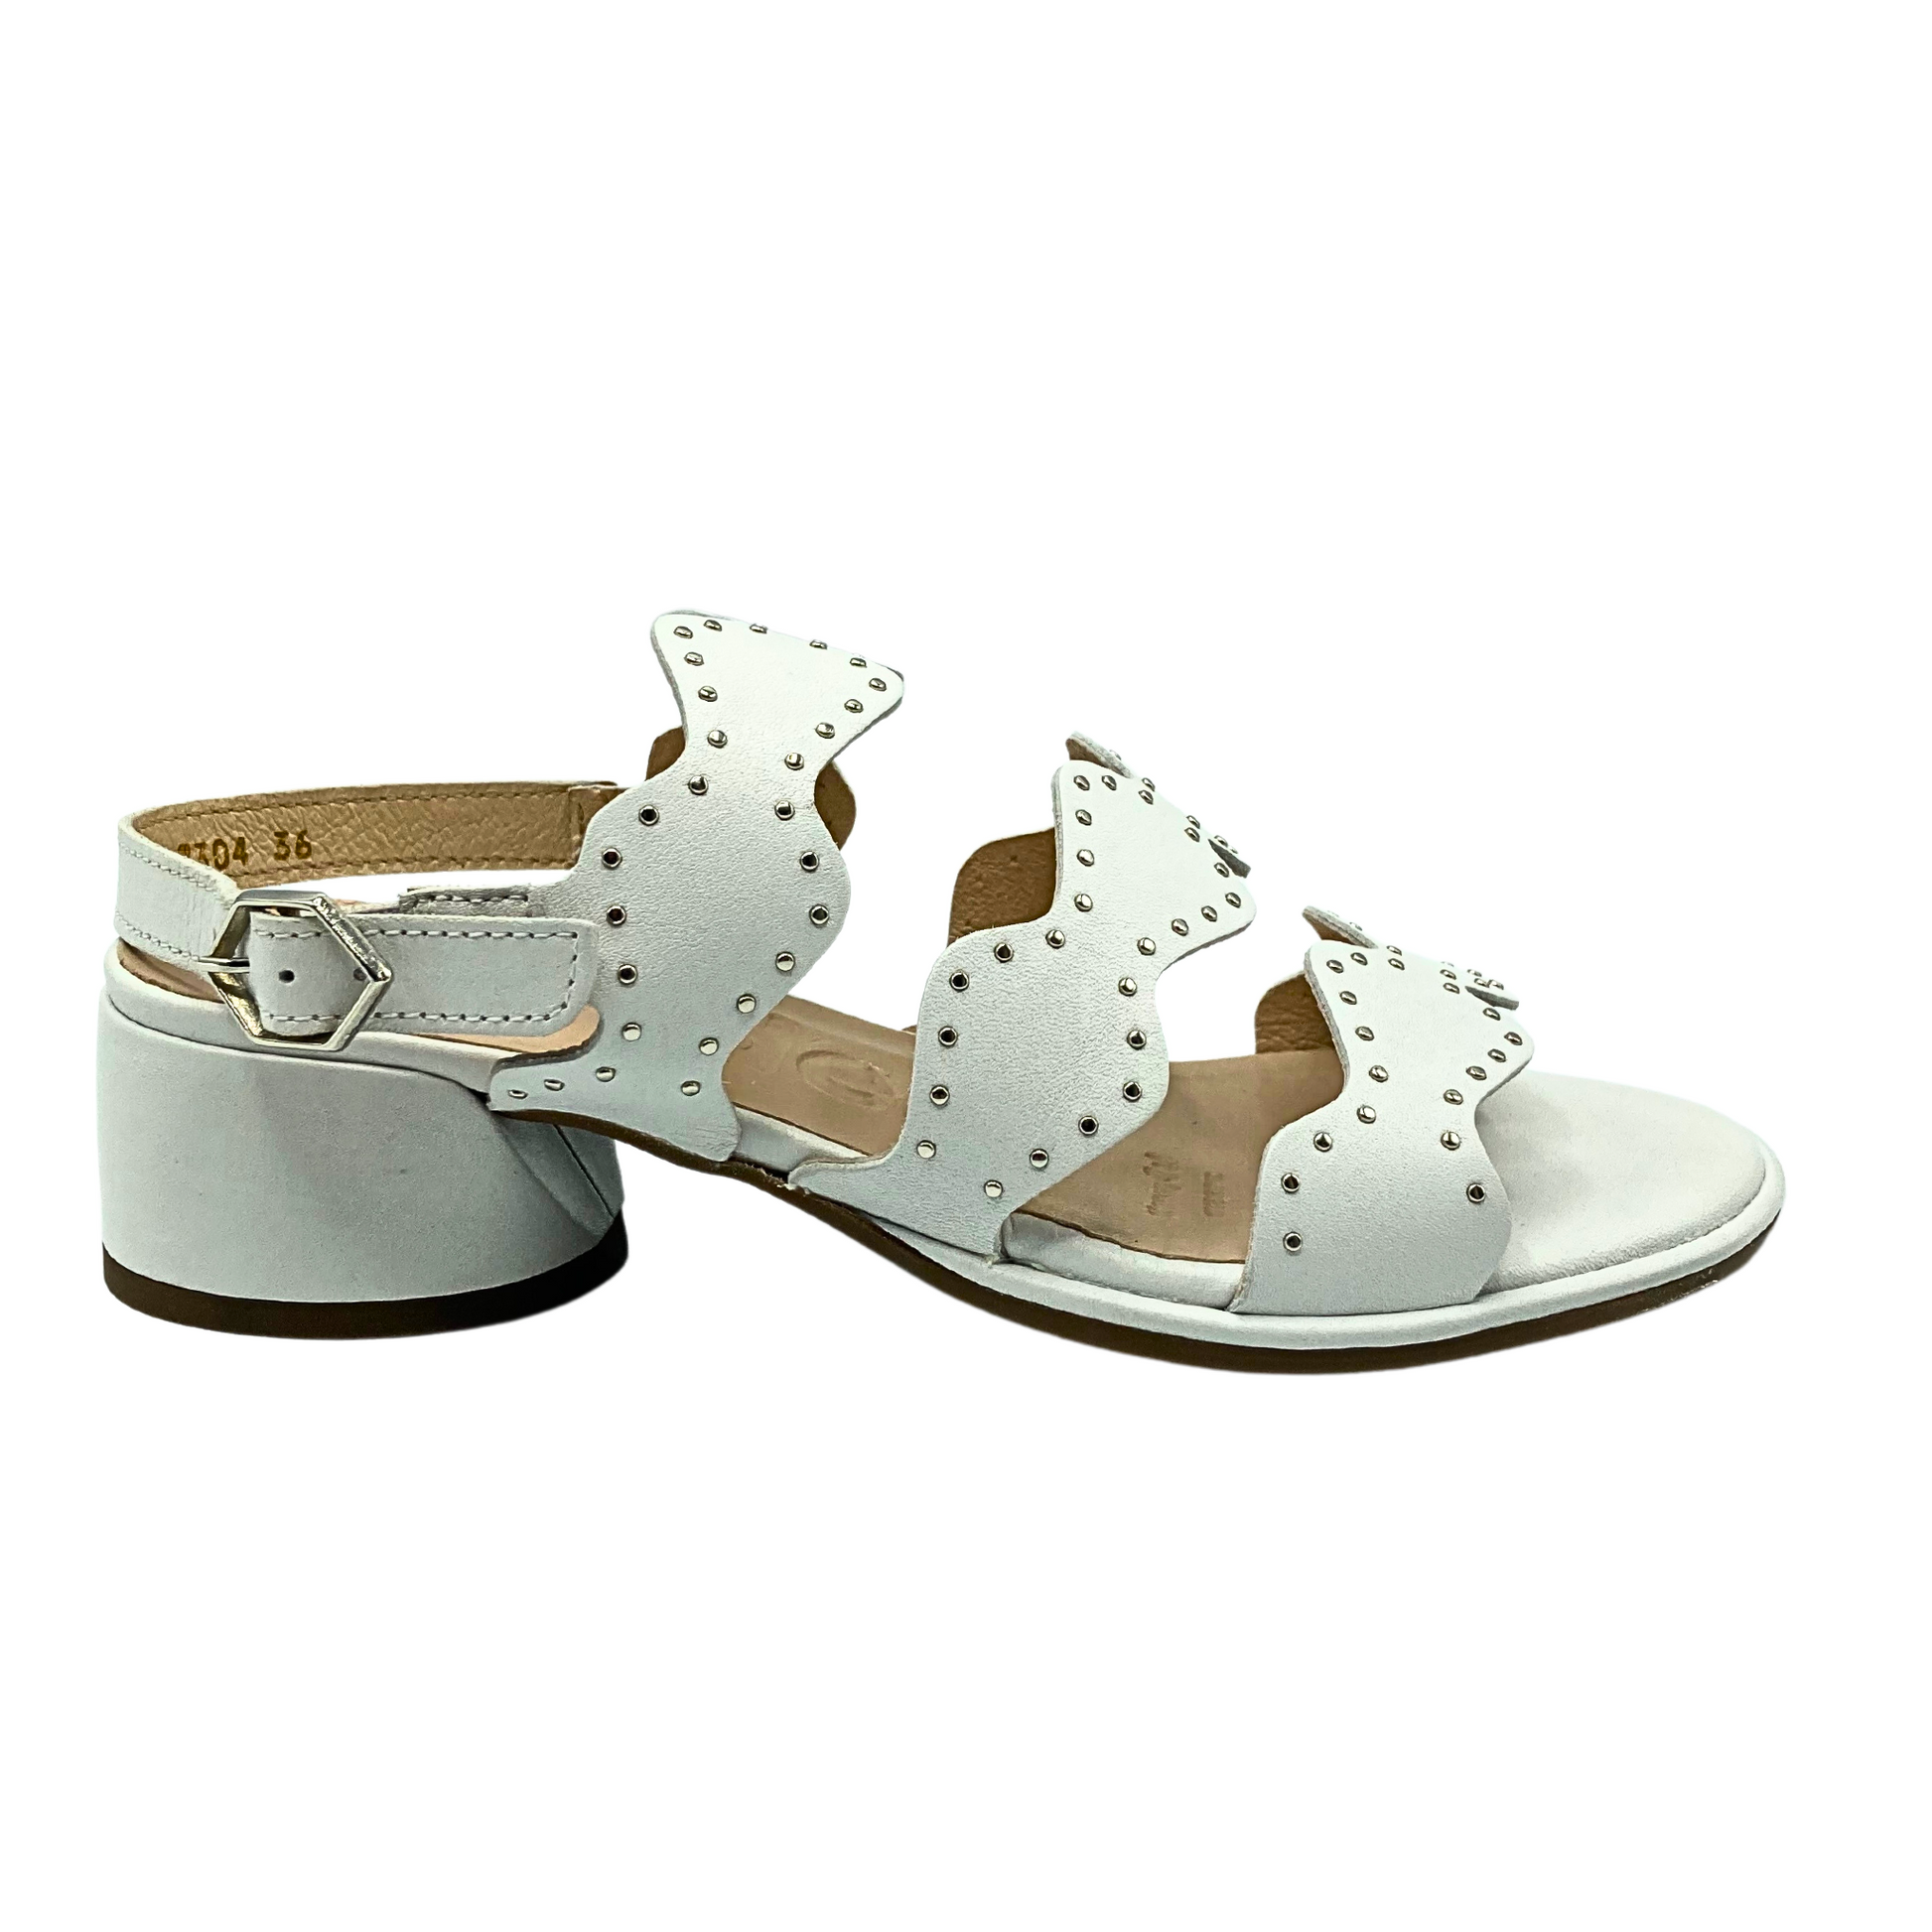 Outside view of a white leather sandal with scalloped straps.  Heel strap has buckle.  Round leather wrapped heel